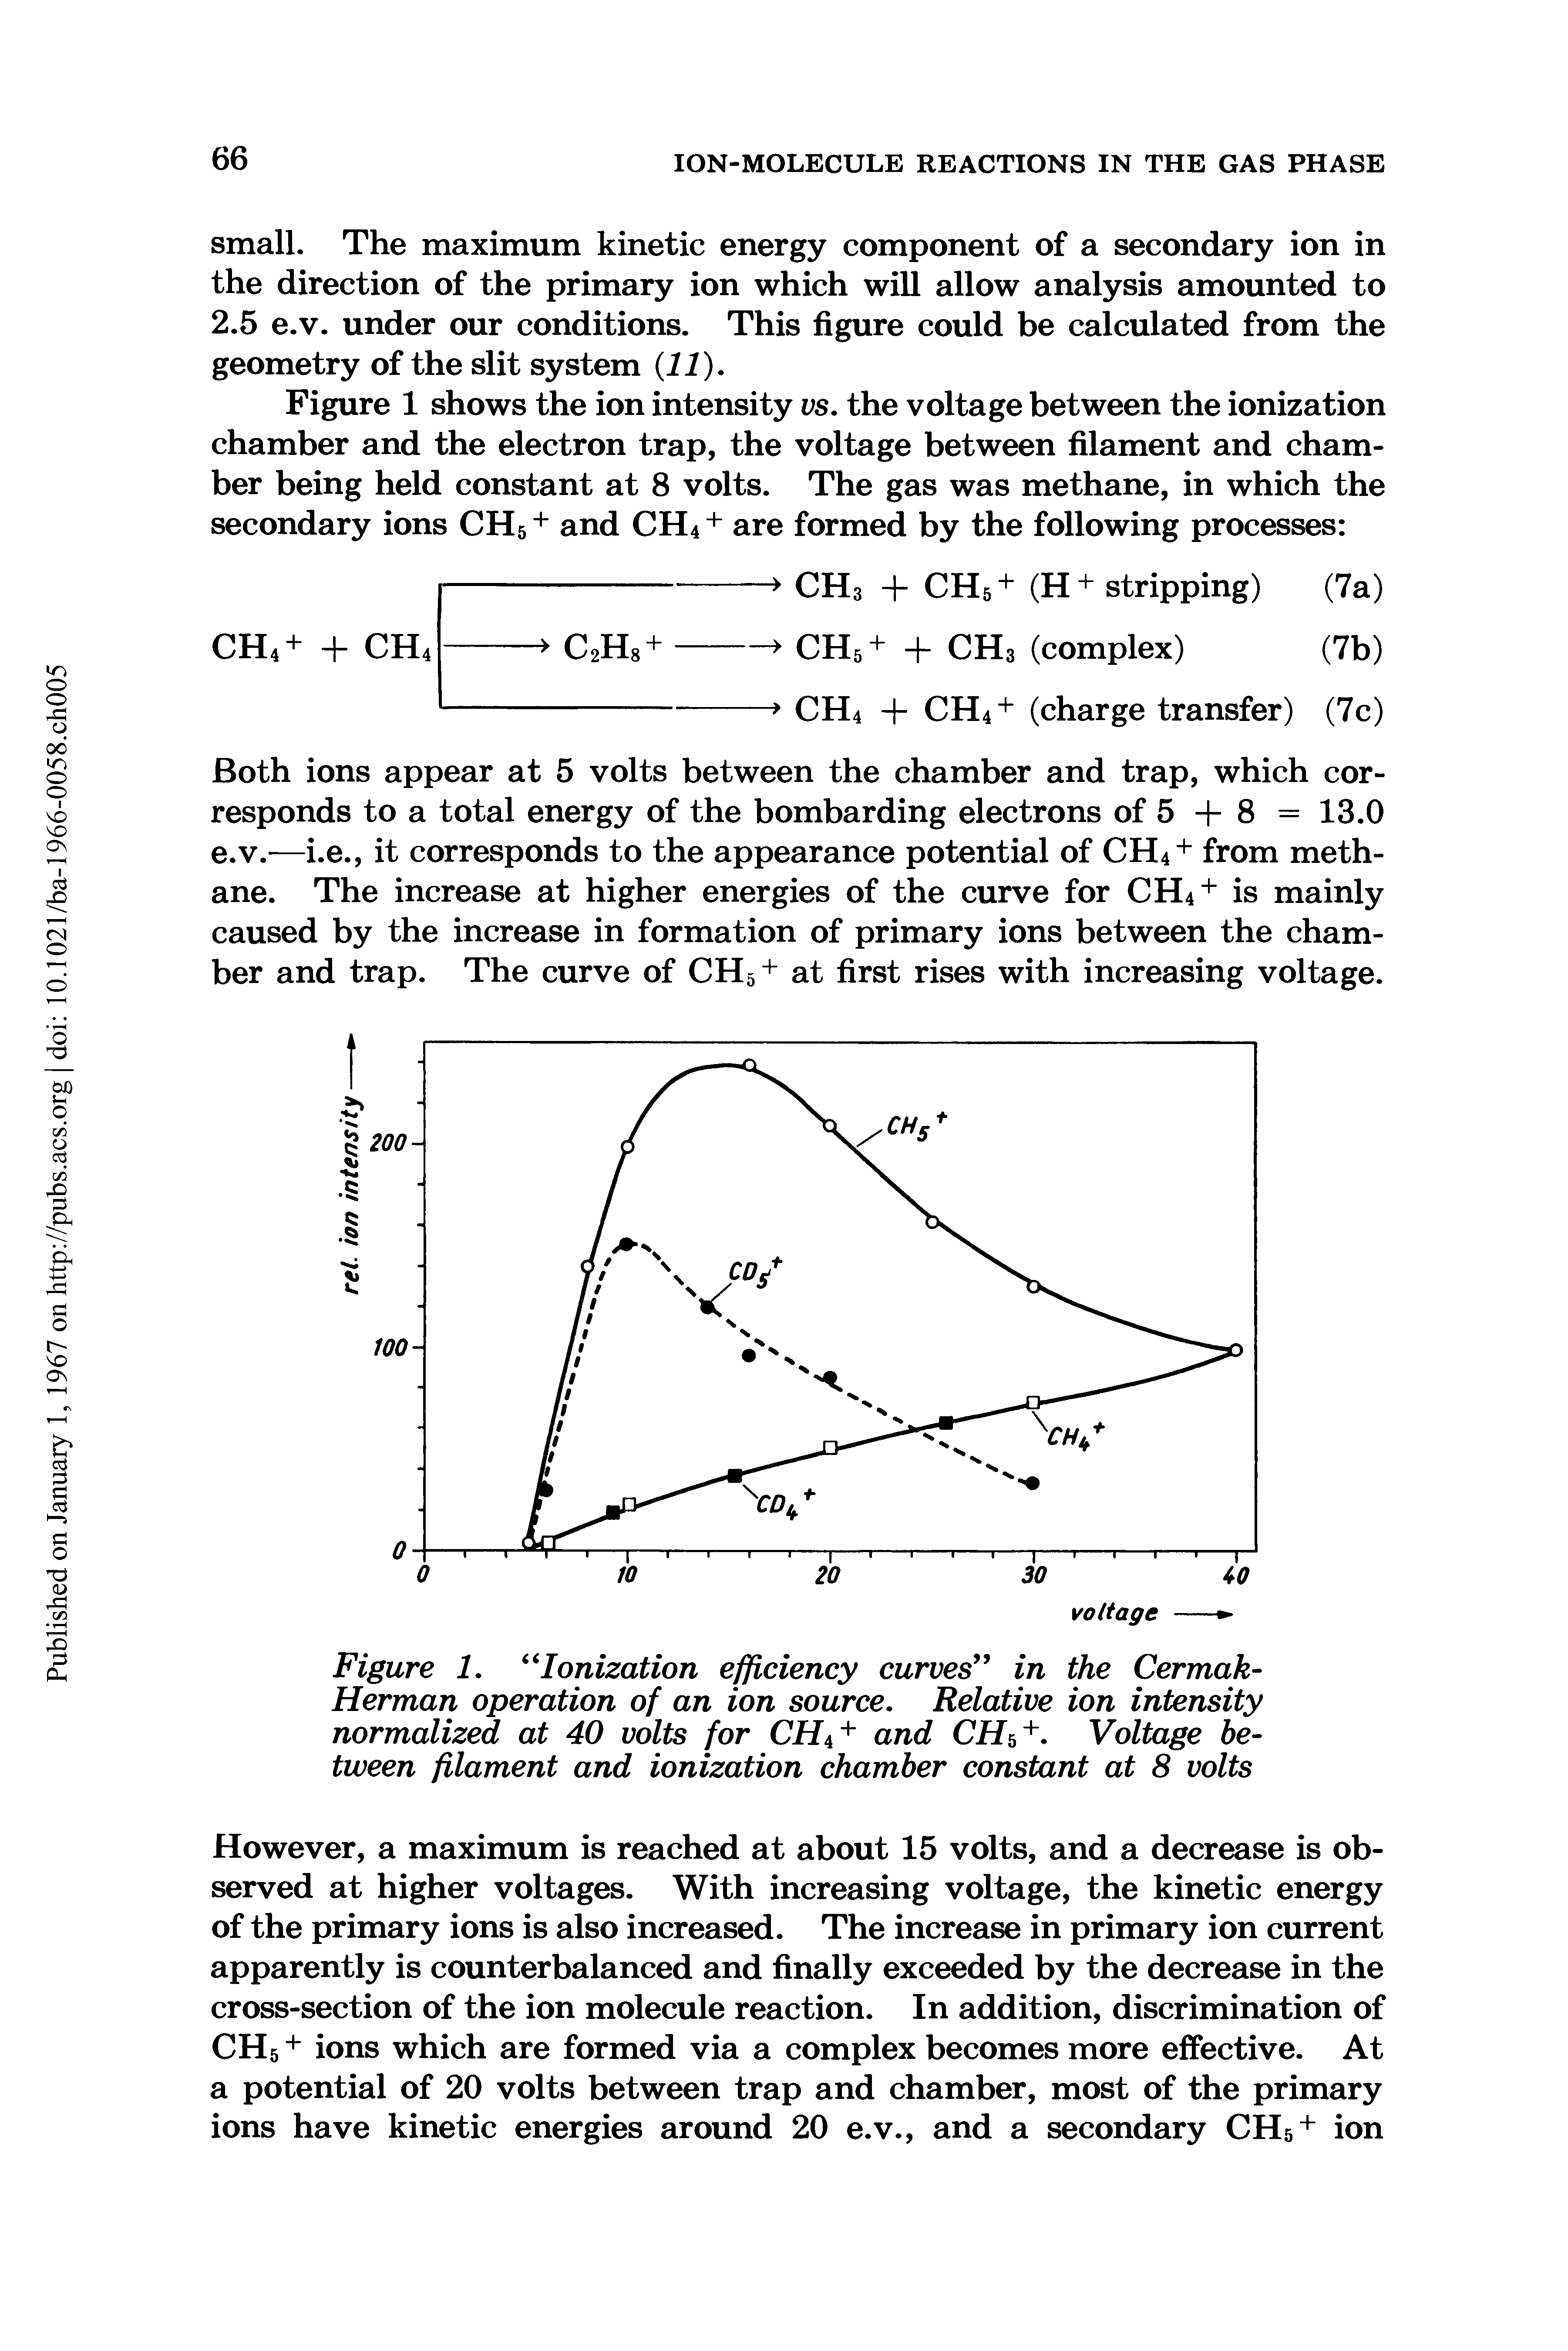 Figure 2. Ionization efficiency curves in the Cermak-Herman operation of an ion source. Relative ion intensity normalized at 40 volts for CHA+ and CH +. Voltage between filament and ionization chamber constant at 8 volts...